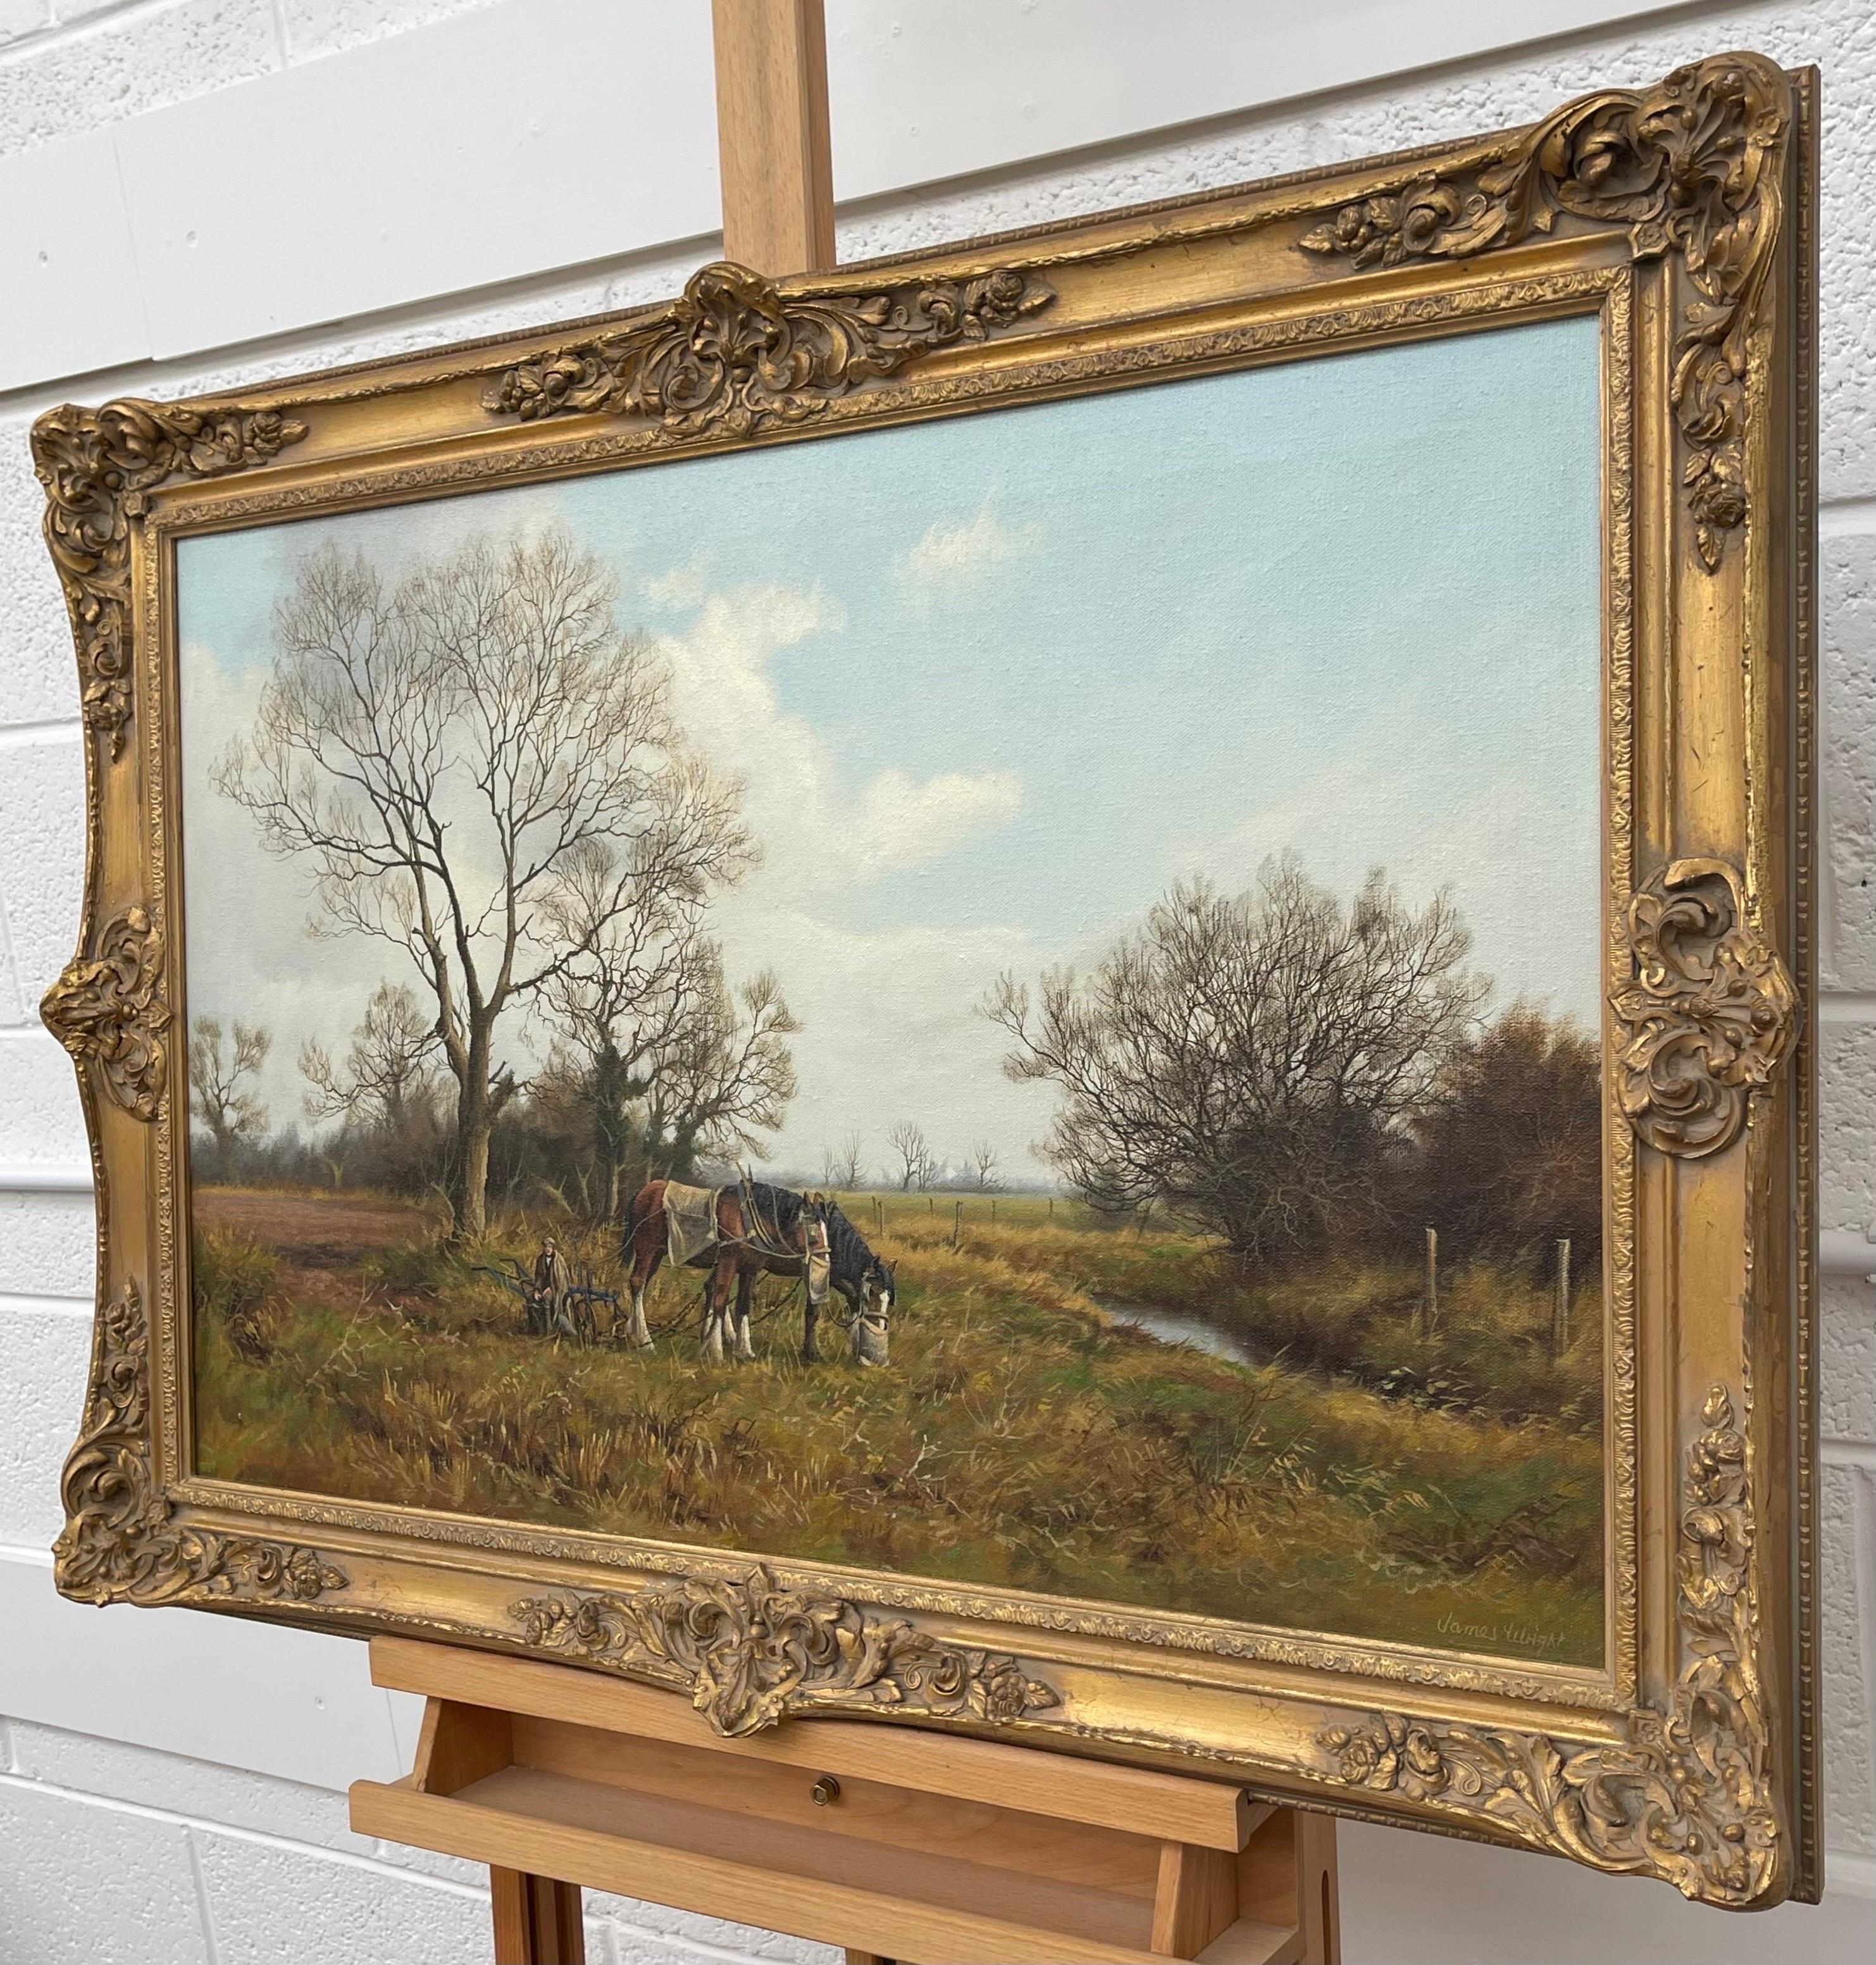 Traditional Vintage Oil Painting of the English Countryside with Horses & Plough by Modern British Artist

Art measures 30 x 20 inches
Frame measures 36 x 26 inches 

James Wright was born in Peterborough in 1935 and now lives in Lincolnshire. James